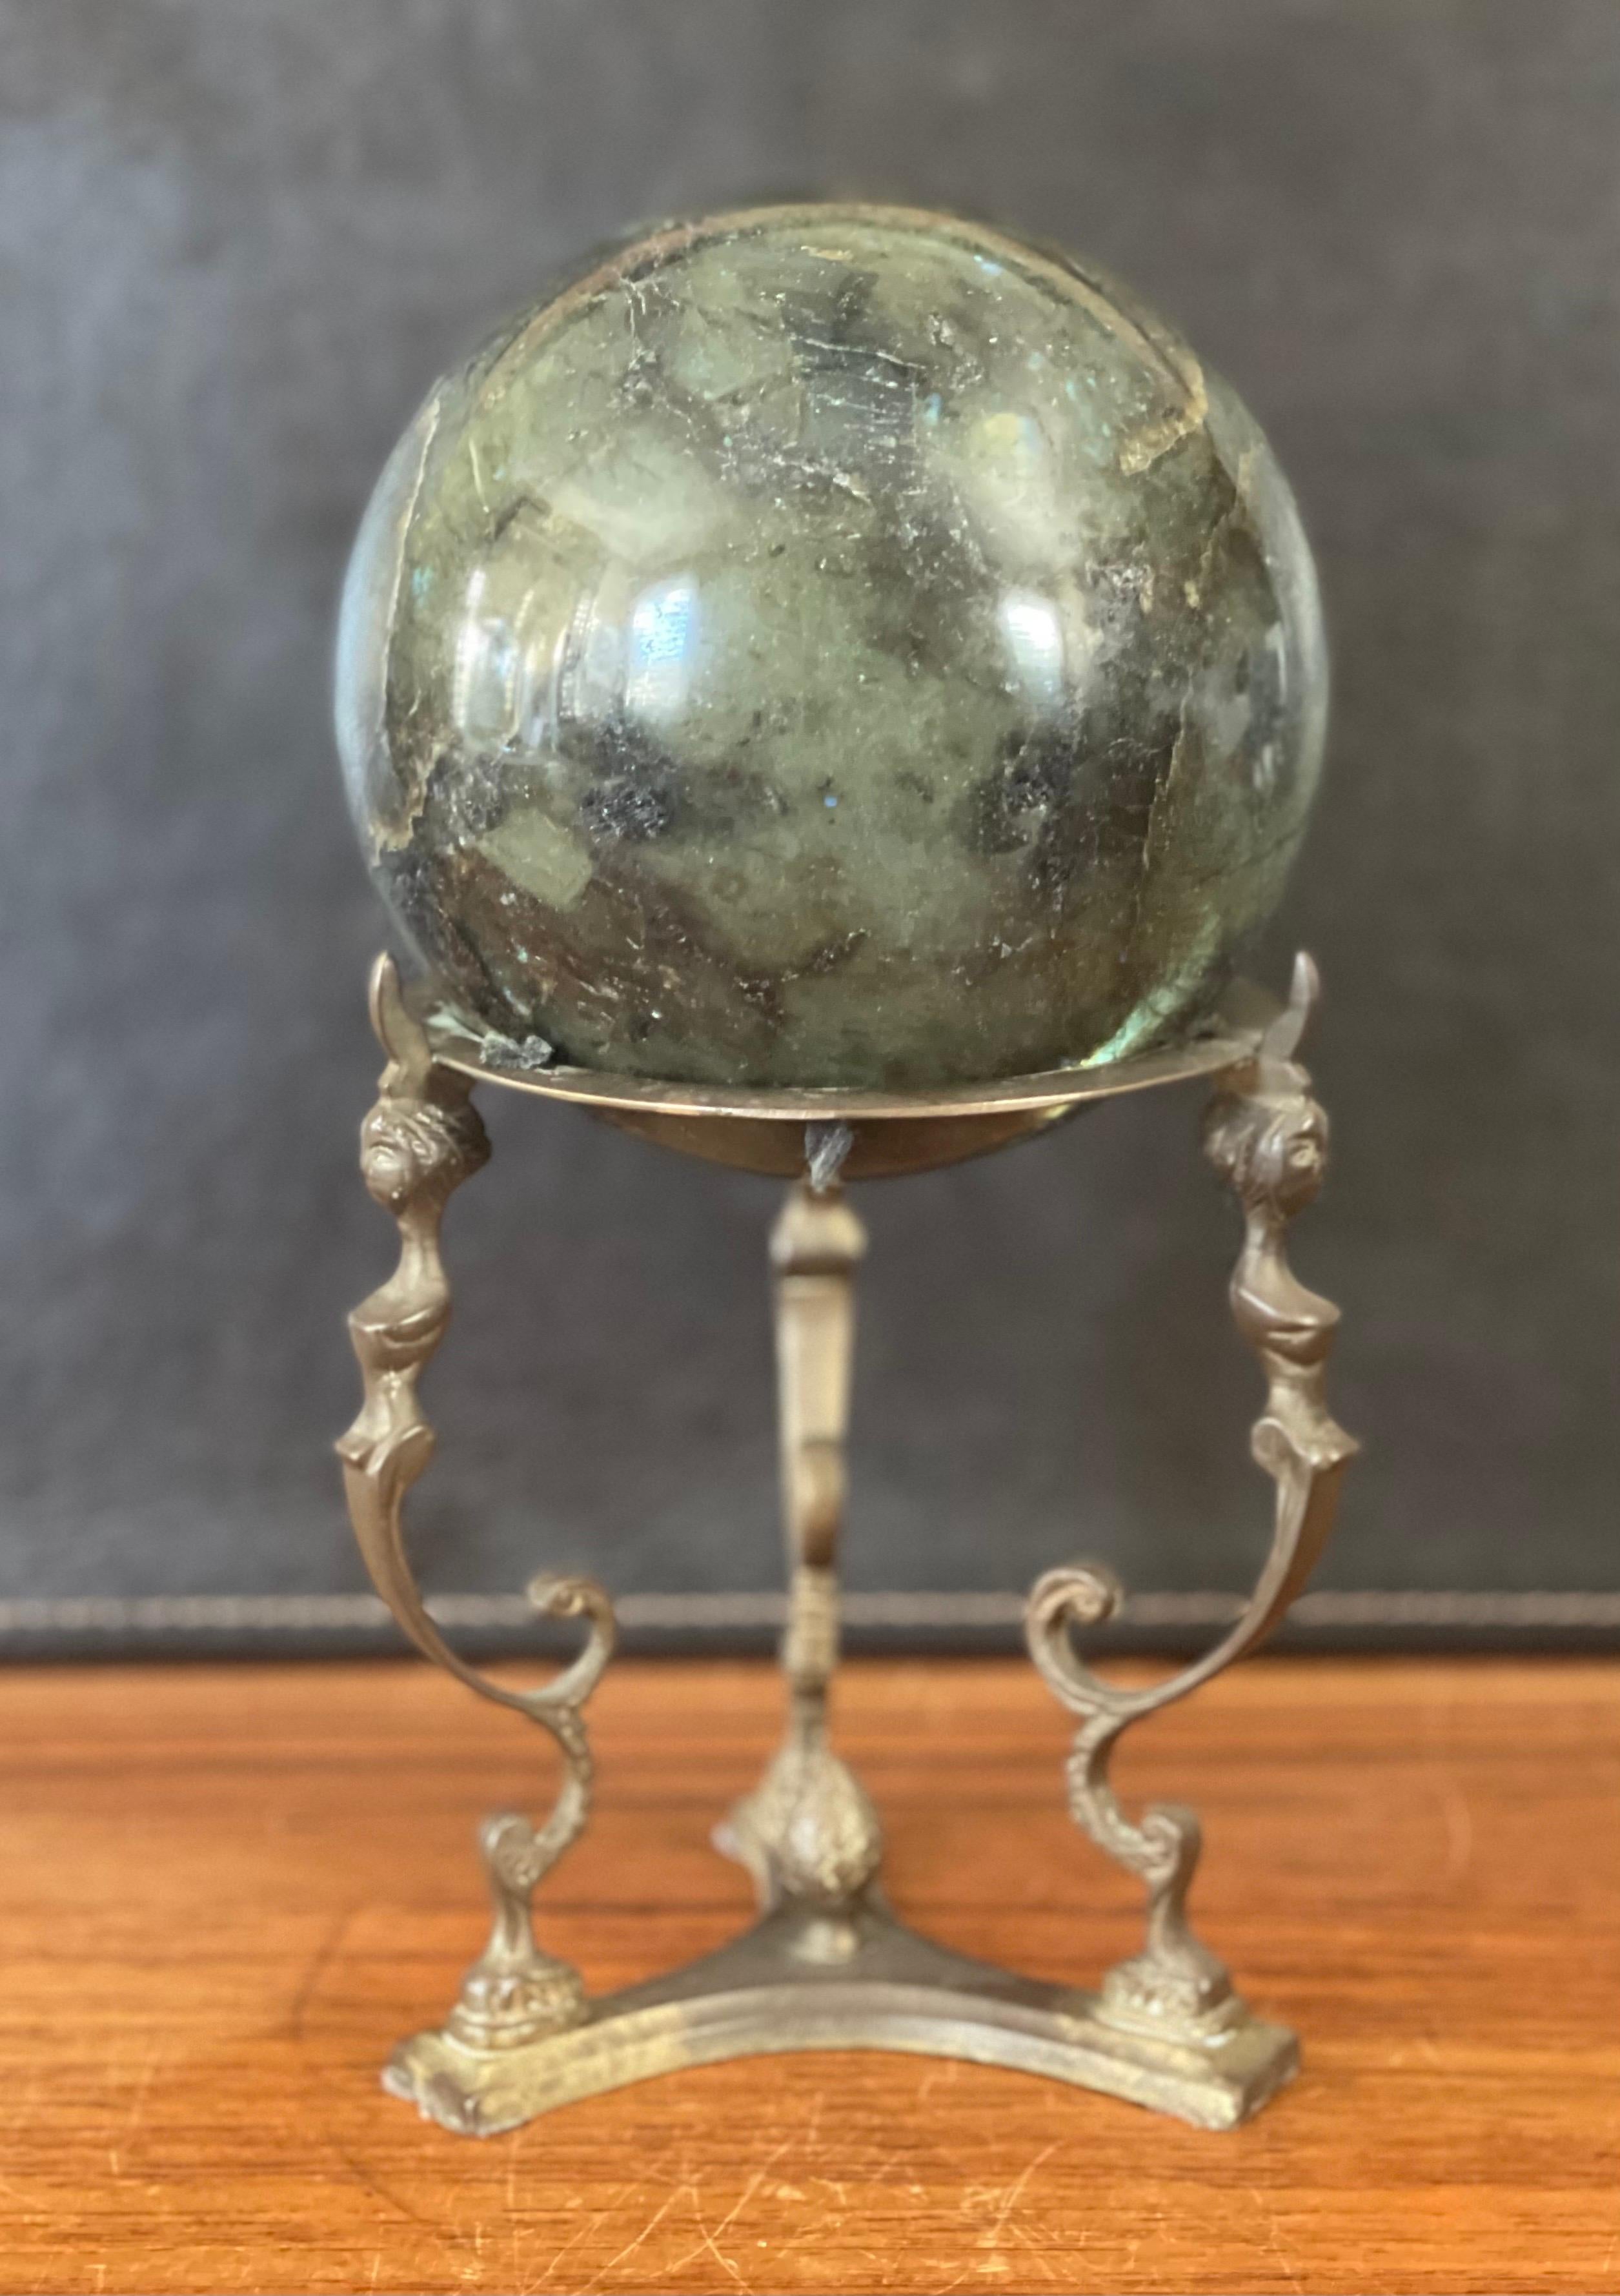 Beautiful solid green marble decorative sphere on bronze base, circa 1970s. The piece is in very good condition with no chips or cracks; it has a nice polished finish with with white and grey veining and speckles. The sphere measures 5